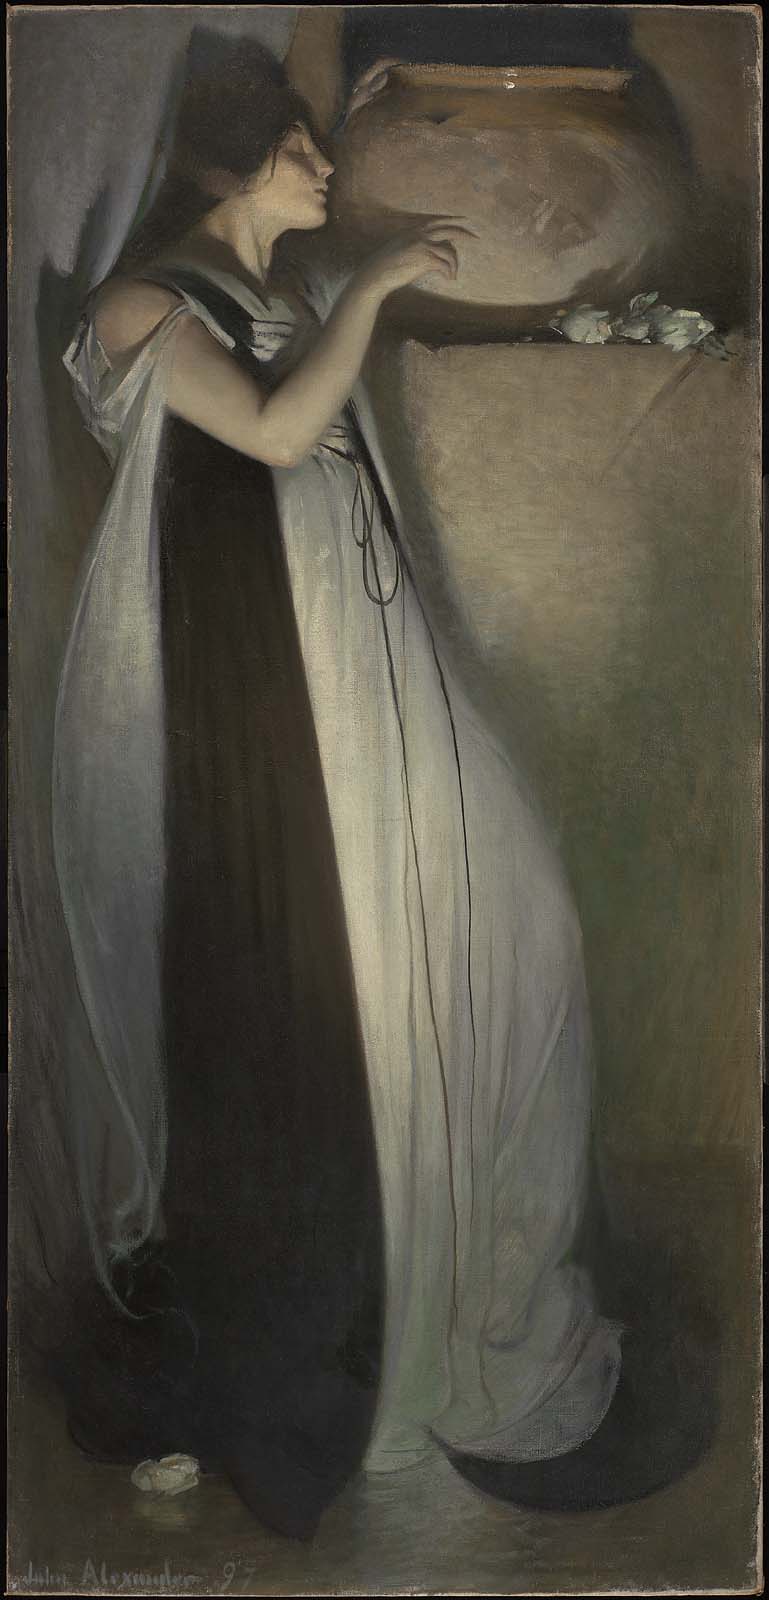 Isabella and the Pot of Basil by John White Alexander